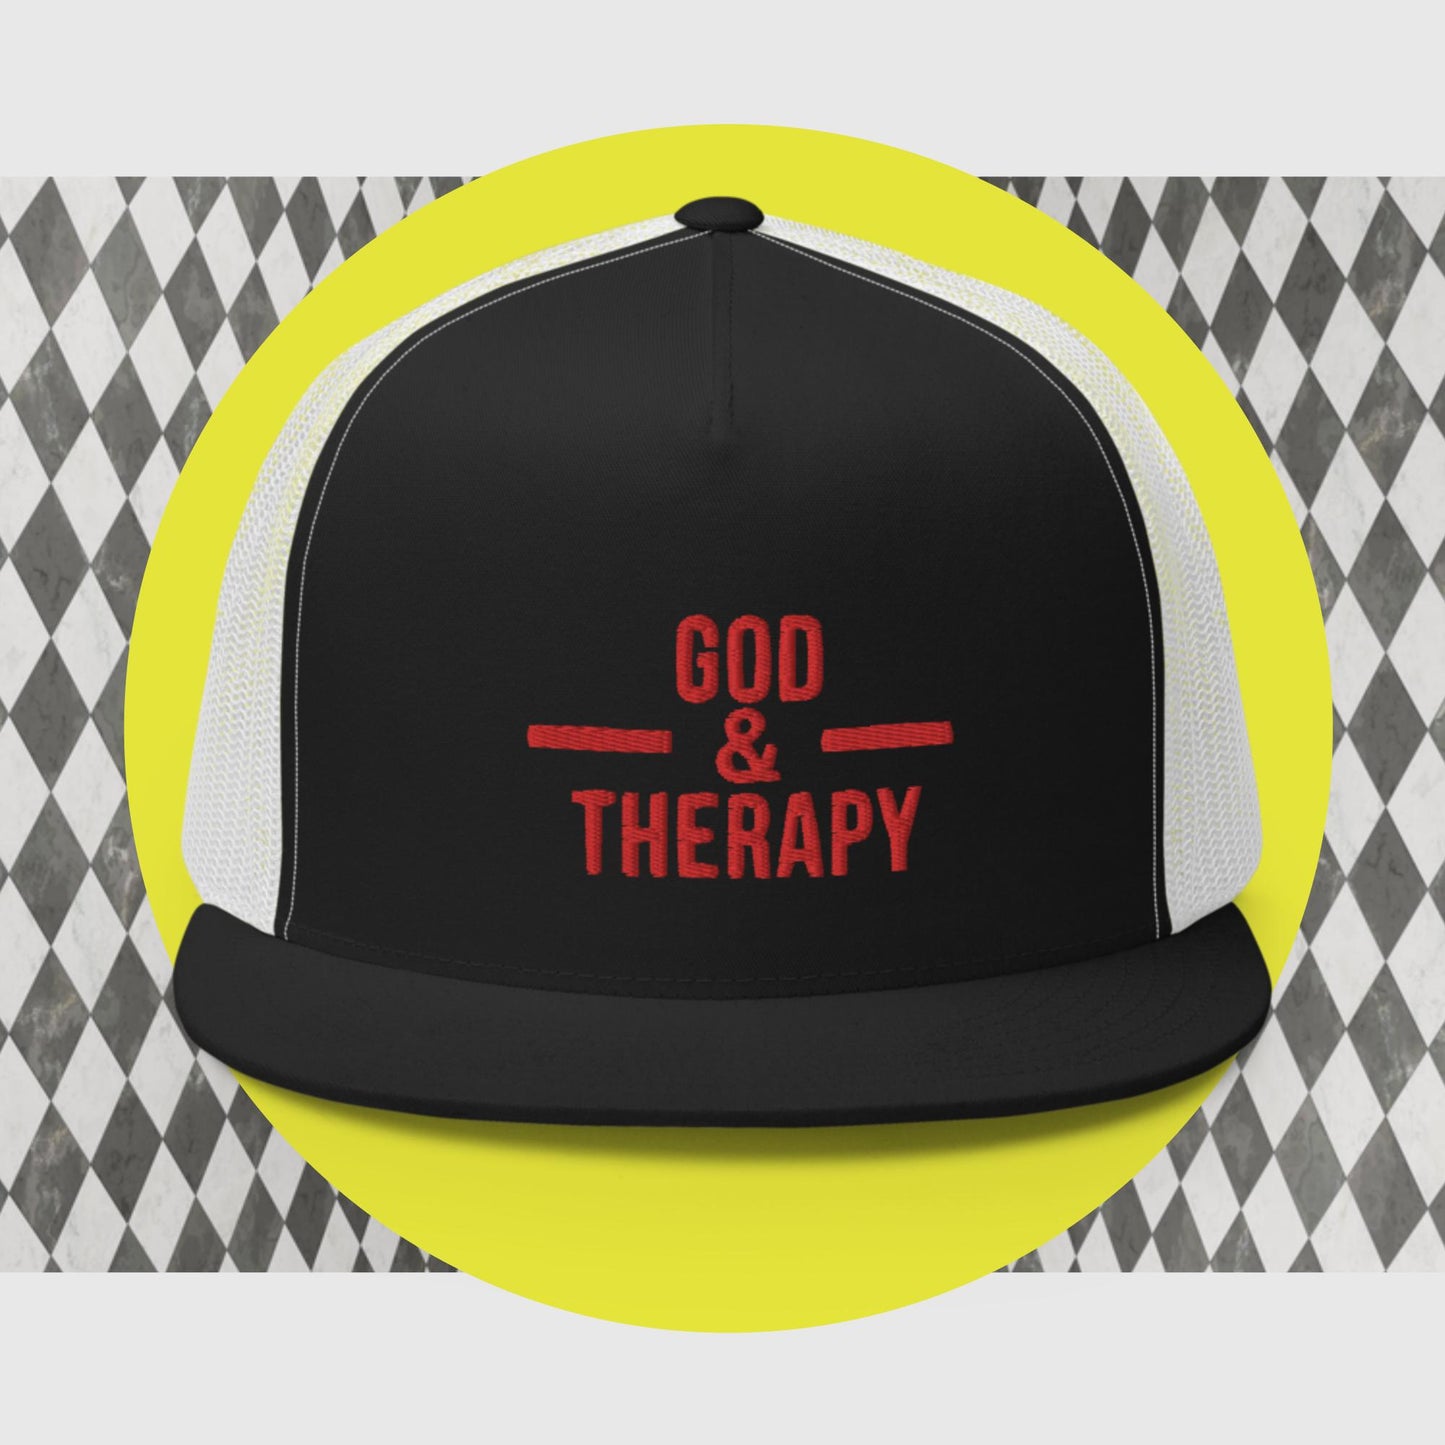 God and Therapy Trucker Cap